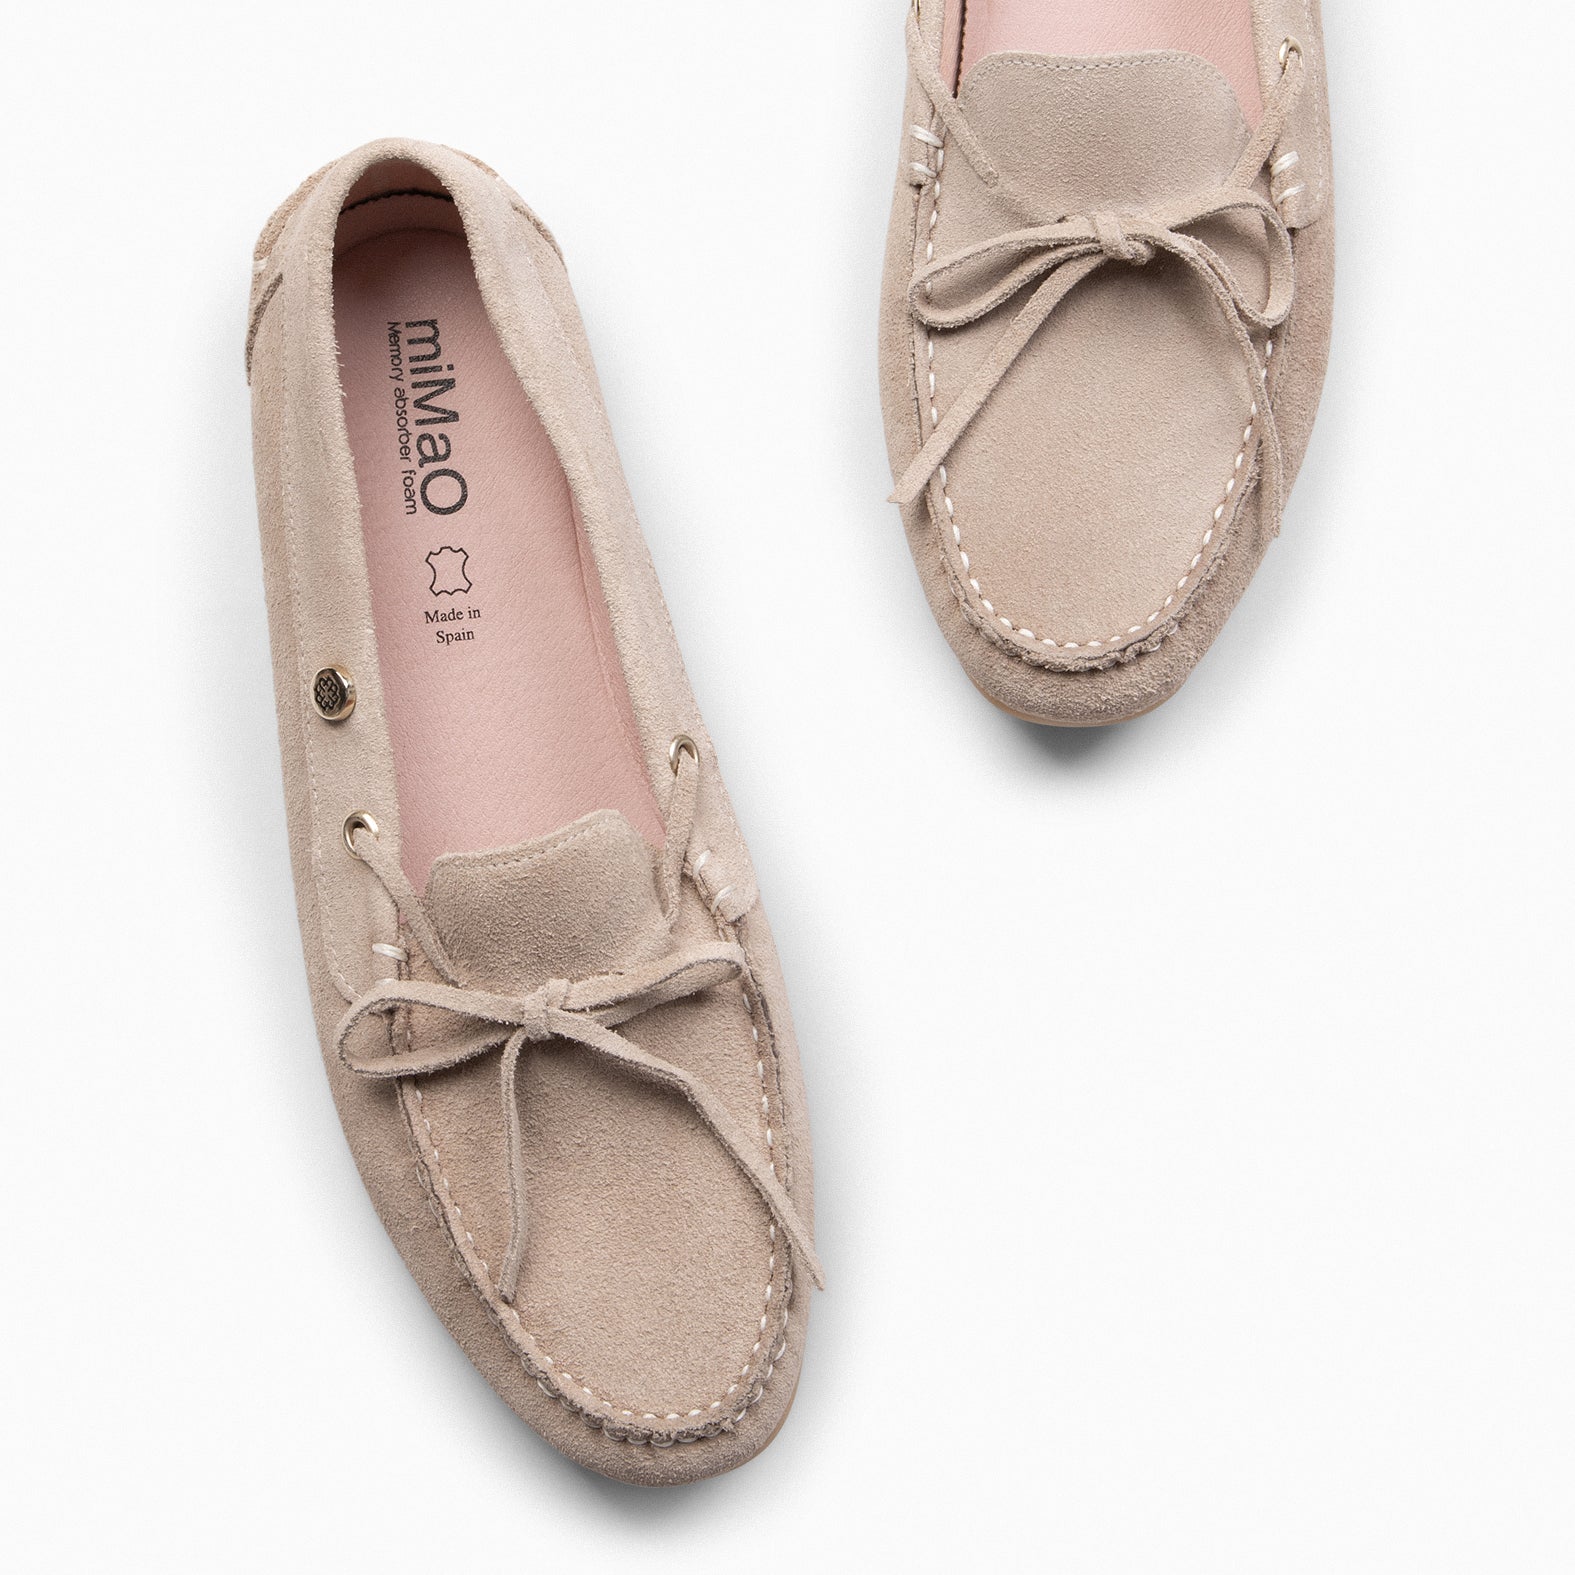 LACE – BEIGE moccasins with removable insole